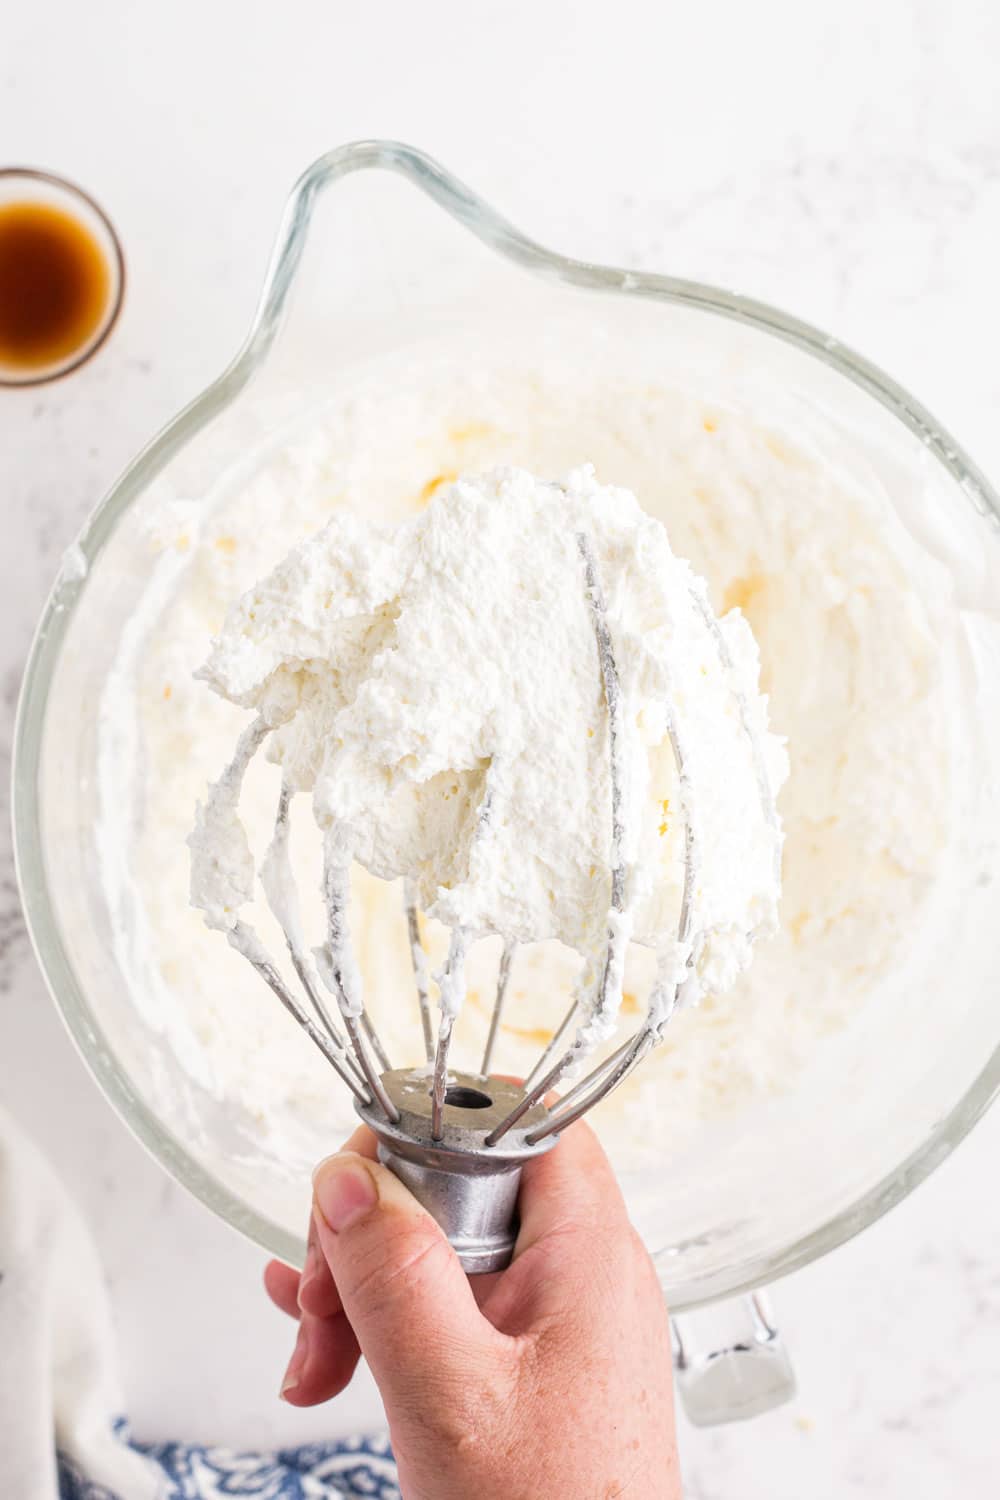 Metal whisk attachment above bowl of whisked egg whites, sugar mixture, cubed butter, and cream of tartar, bowl of vanilla extract, blue and white decorative linen, on a marble countertop